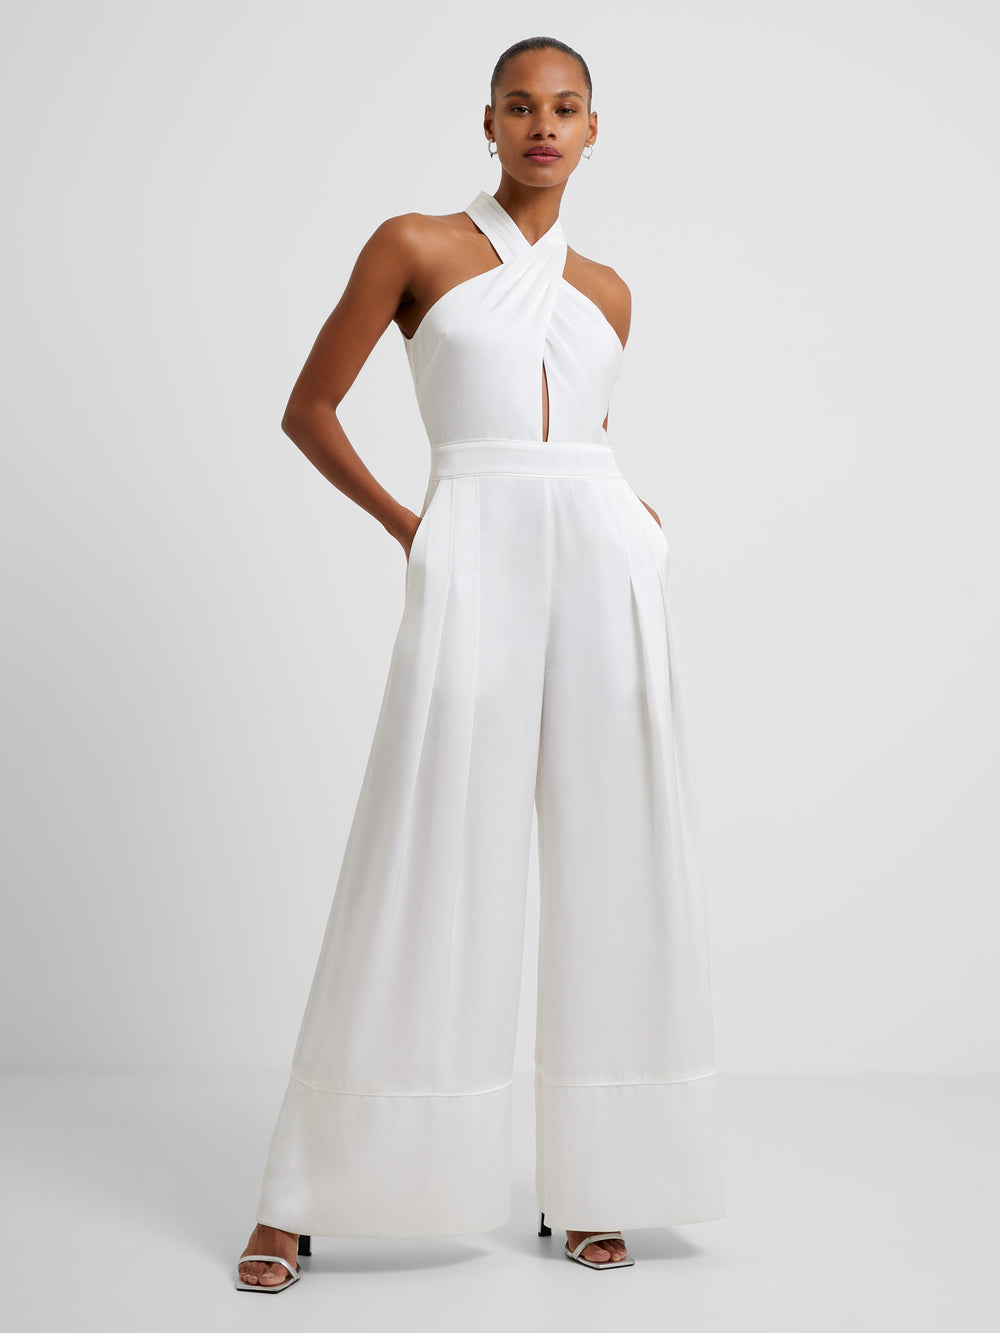 FRENCH CONNECTION Whisper Wide-Leg Jumpsuit